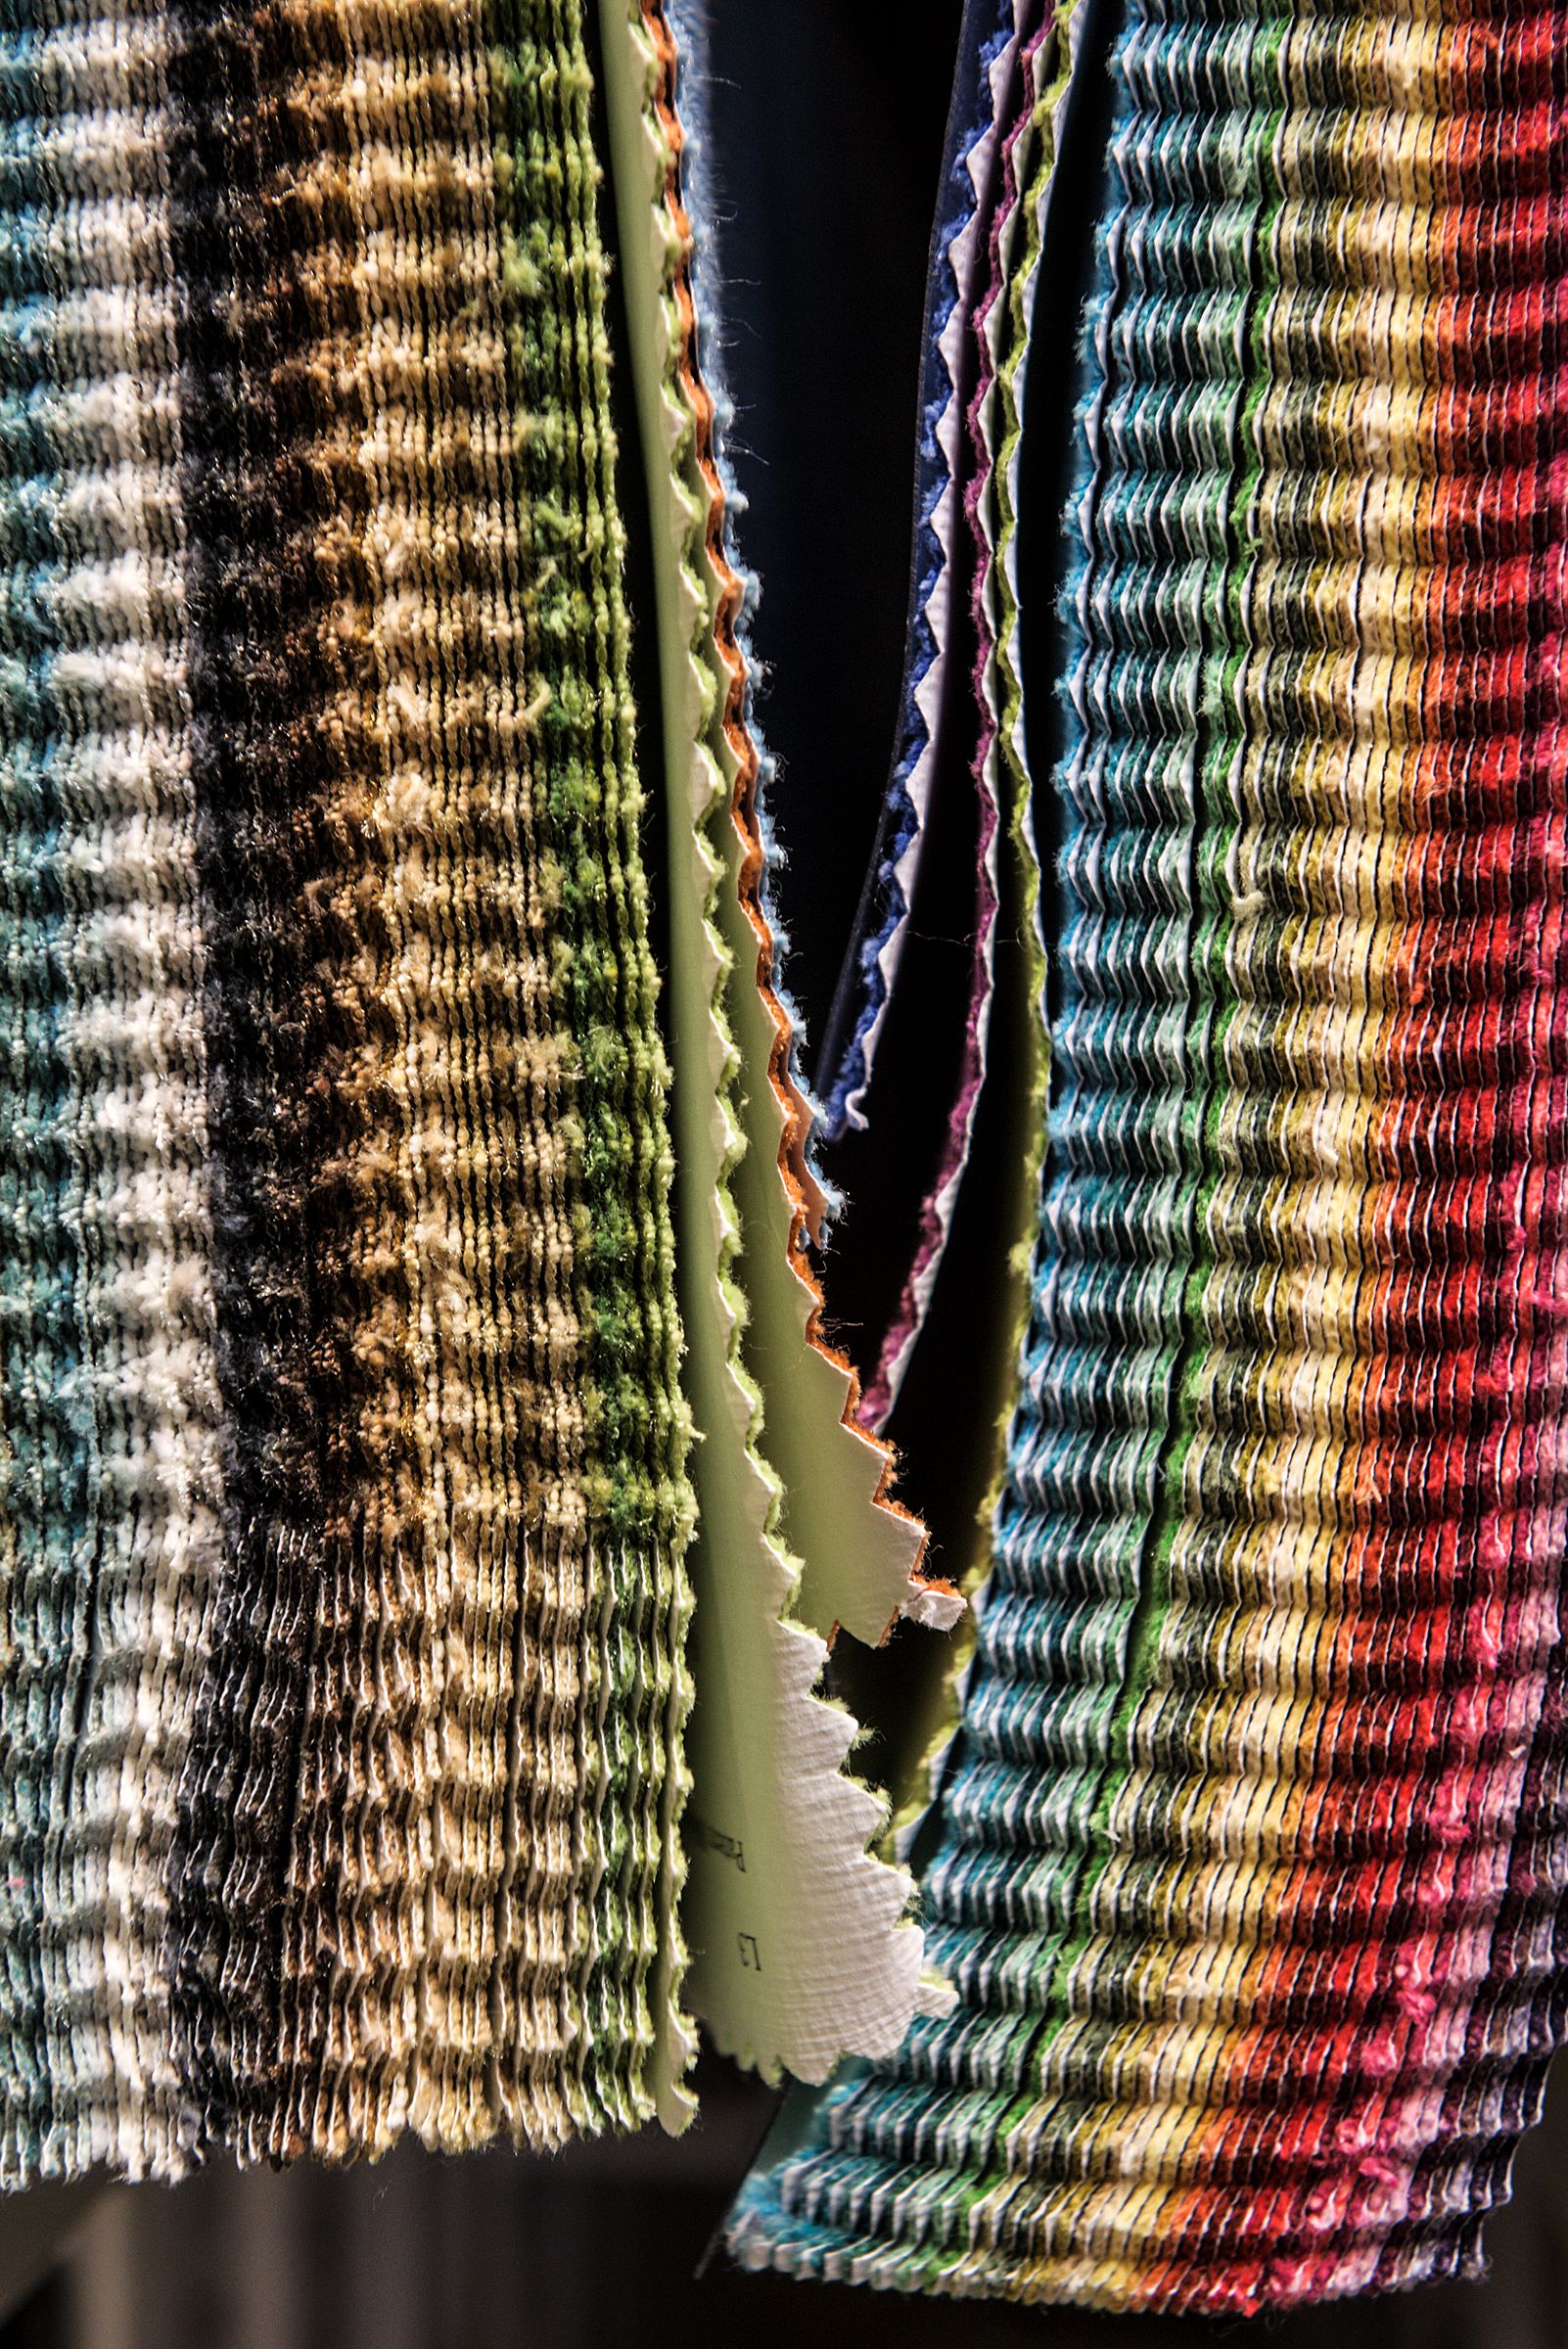 Fabric samples hang on the wall at Gilberte Interiors in Hanover, N.H., Thursday, Jan. 10, 2019. Gilberte and Antranig Boghosian started the business over 50 years ago and their children Cheryl and Aharon now co-own it. (Valley News - James M. Patterson) Copyright Valley News. May not be reprinted or used online without permission. Send requests to permission@vnews.com.